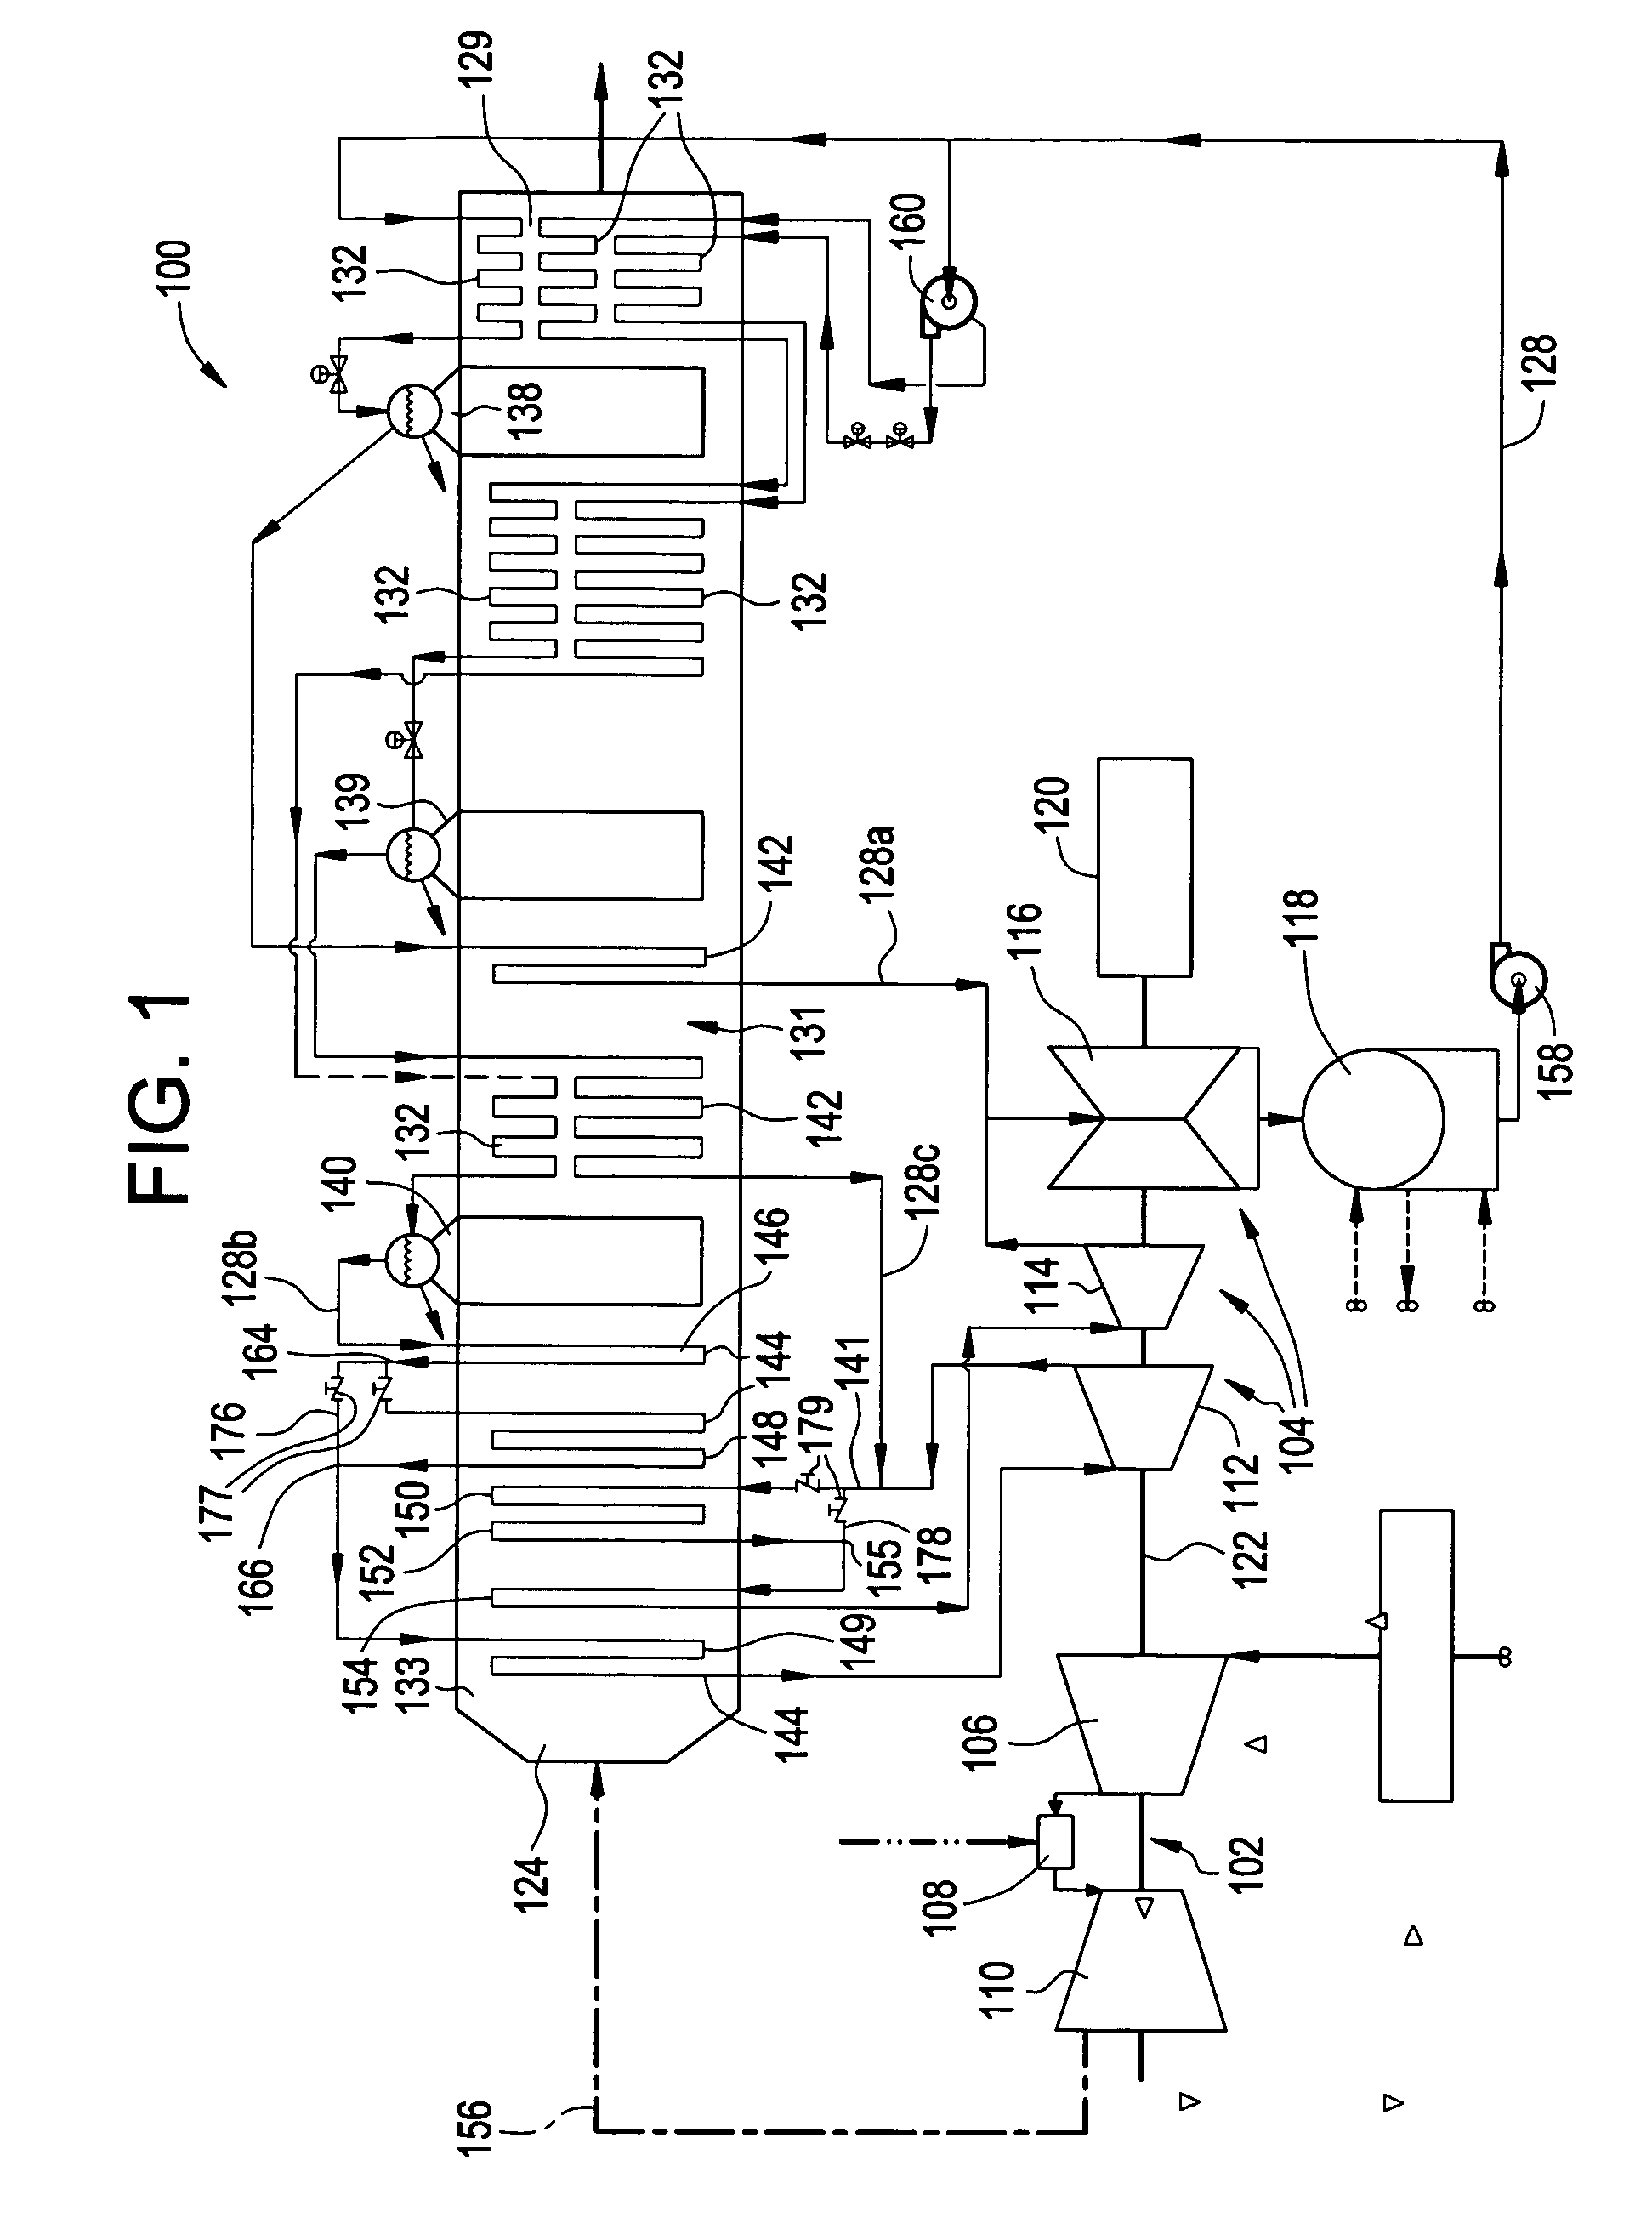 System for controlling steam temperature